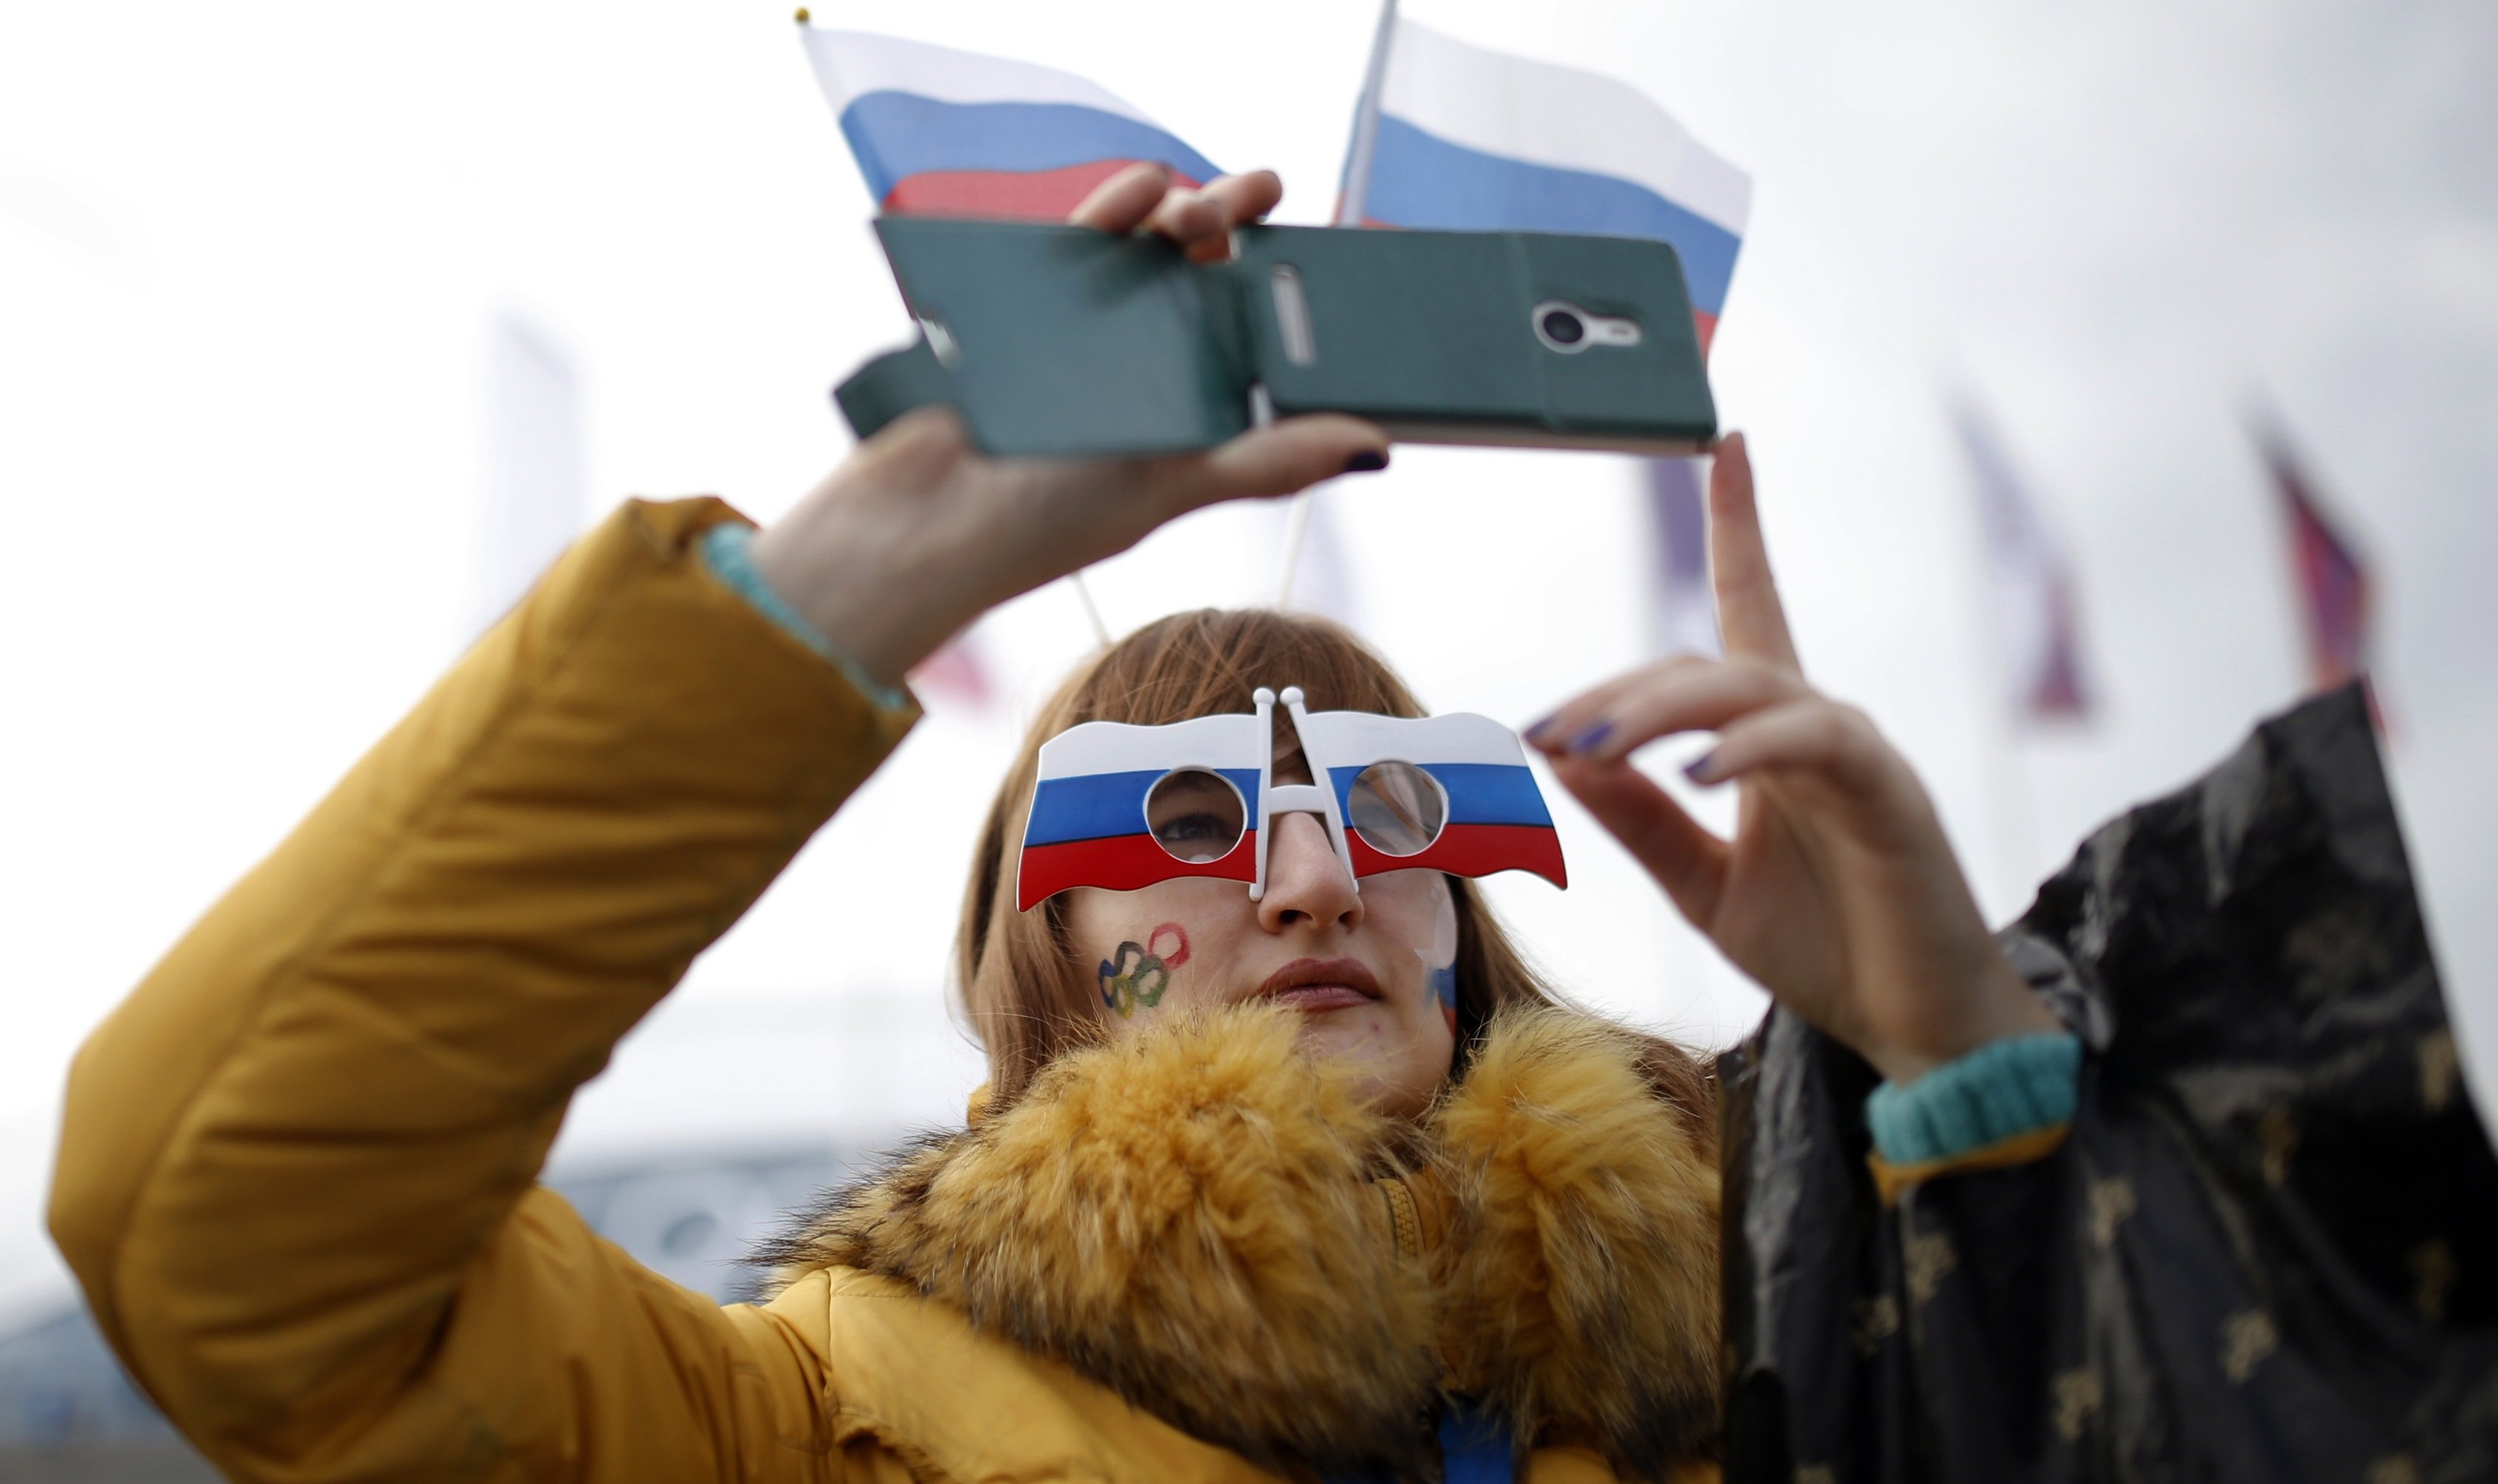 A woman sports the Russian national flag with her eyewear and takes photographs with a smart phone at Olympic Park.